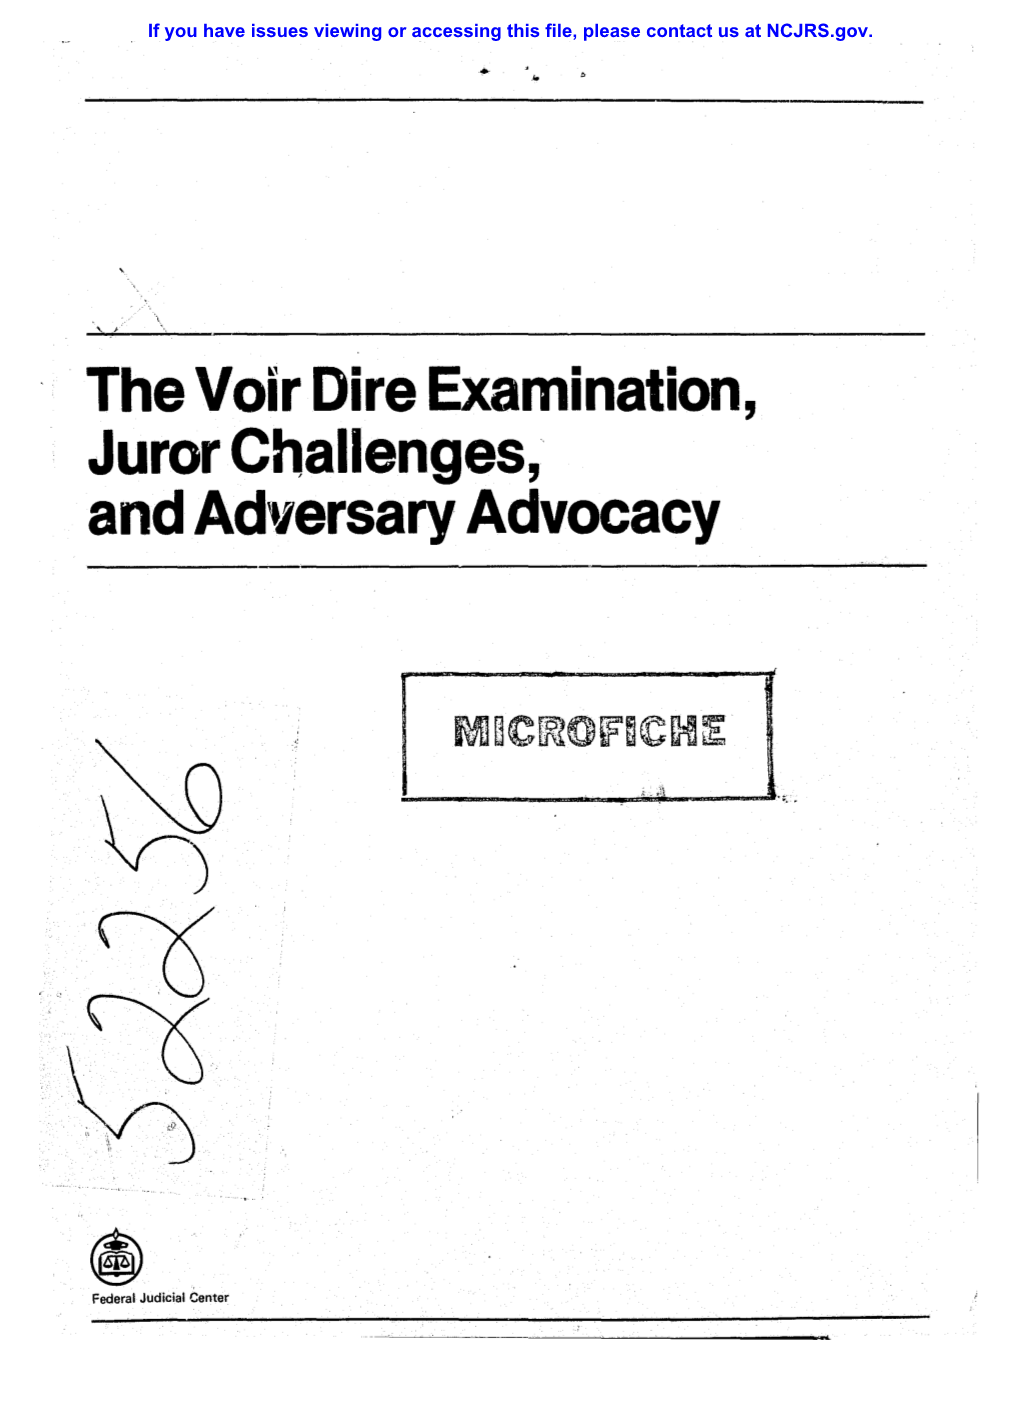 The Voir Dire Examination, Juror Challenges, and Adt/Ersary Advocacy